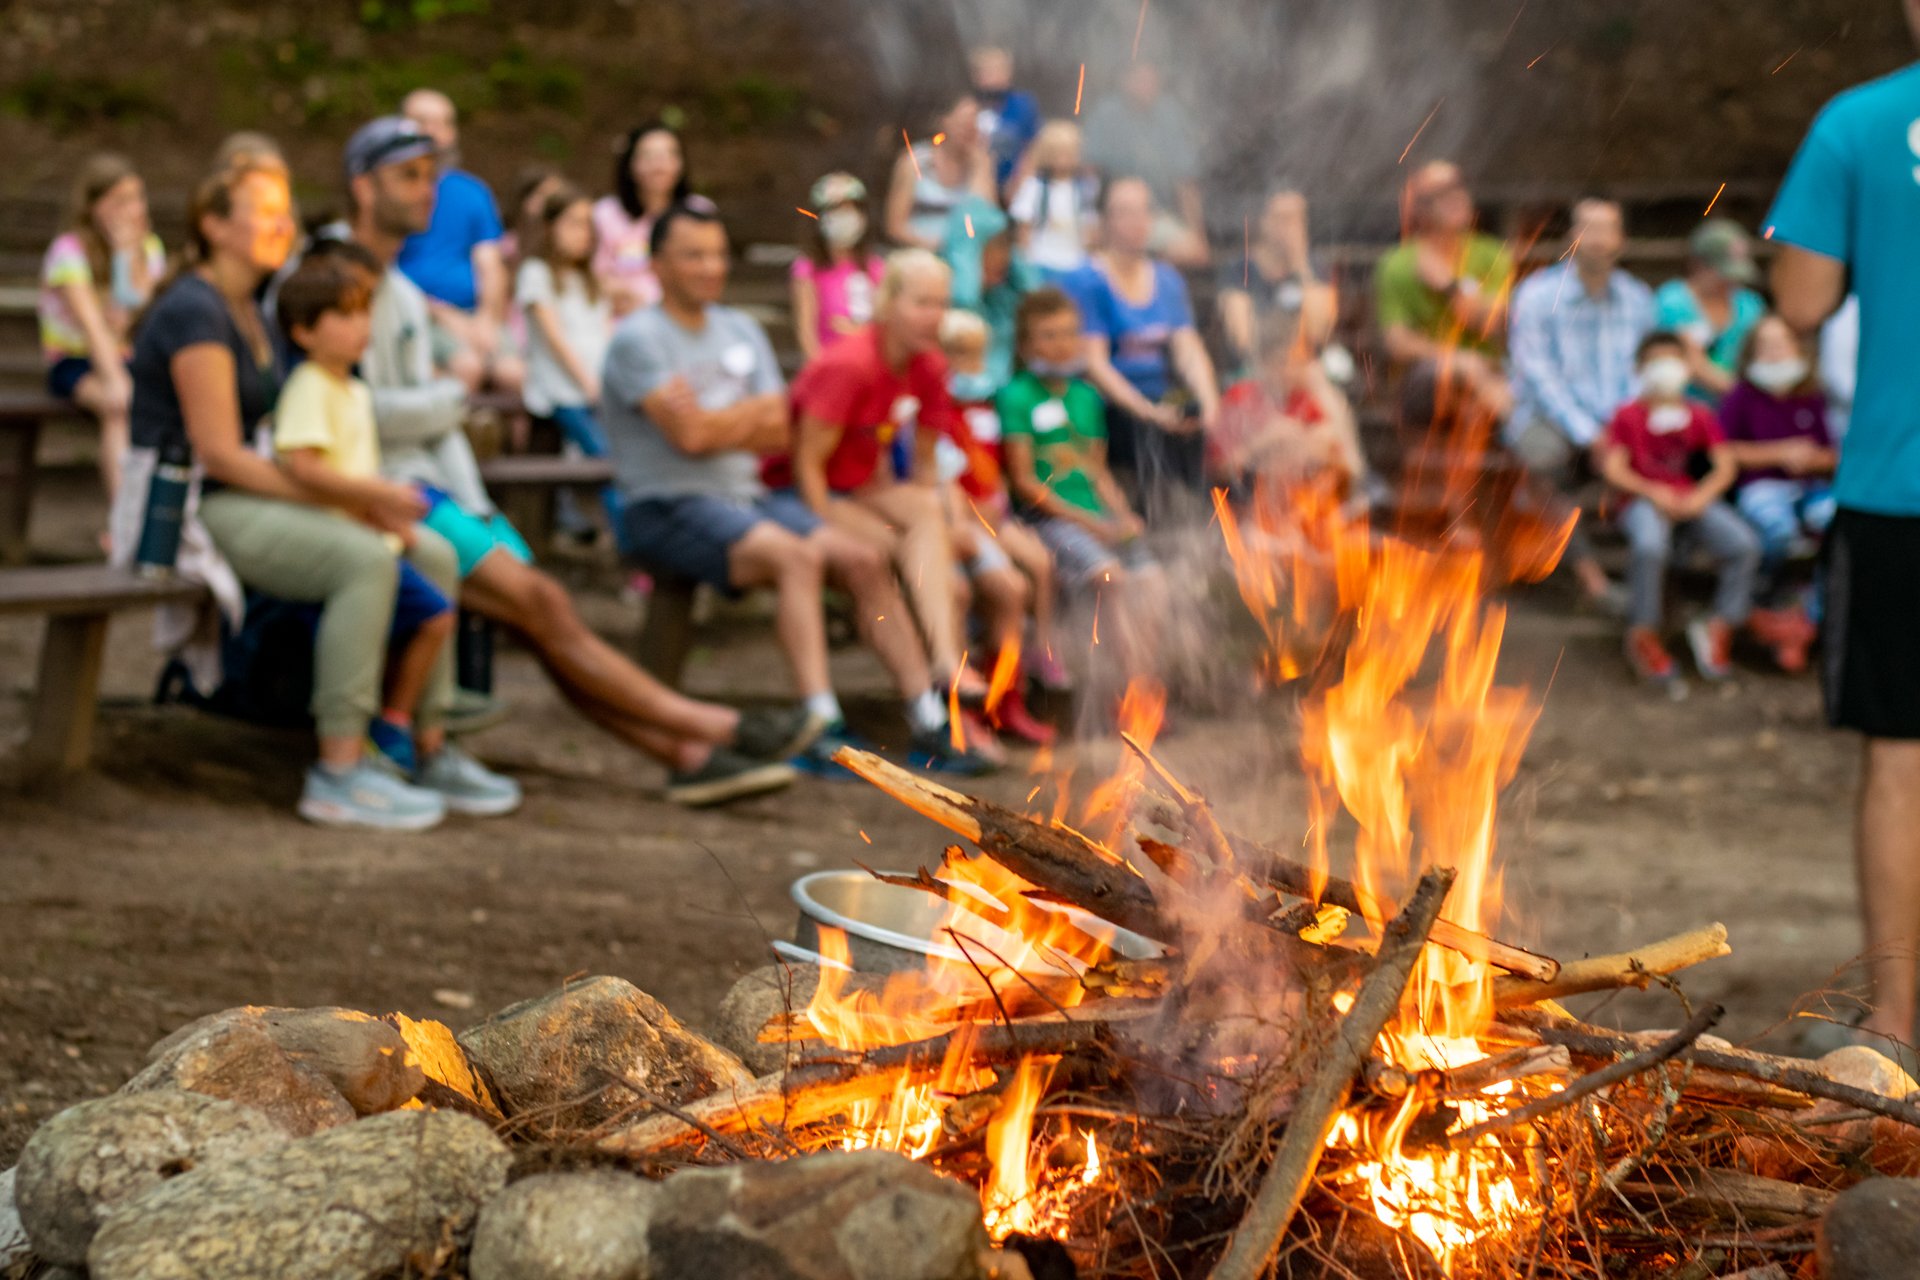 A campfire blazes in the foreground while in the background, slightly out of focus, a group of families sits together in the outdoor amphitheater at Wildwood, enjoying an evening Family Camp program